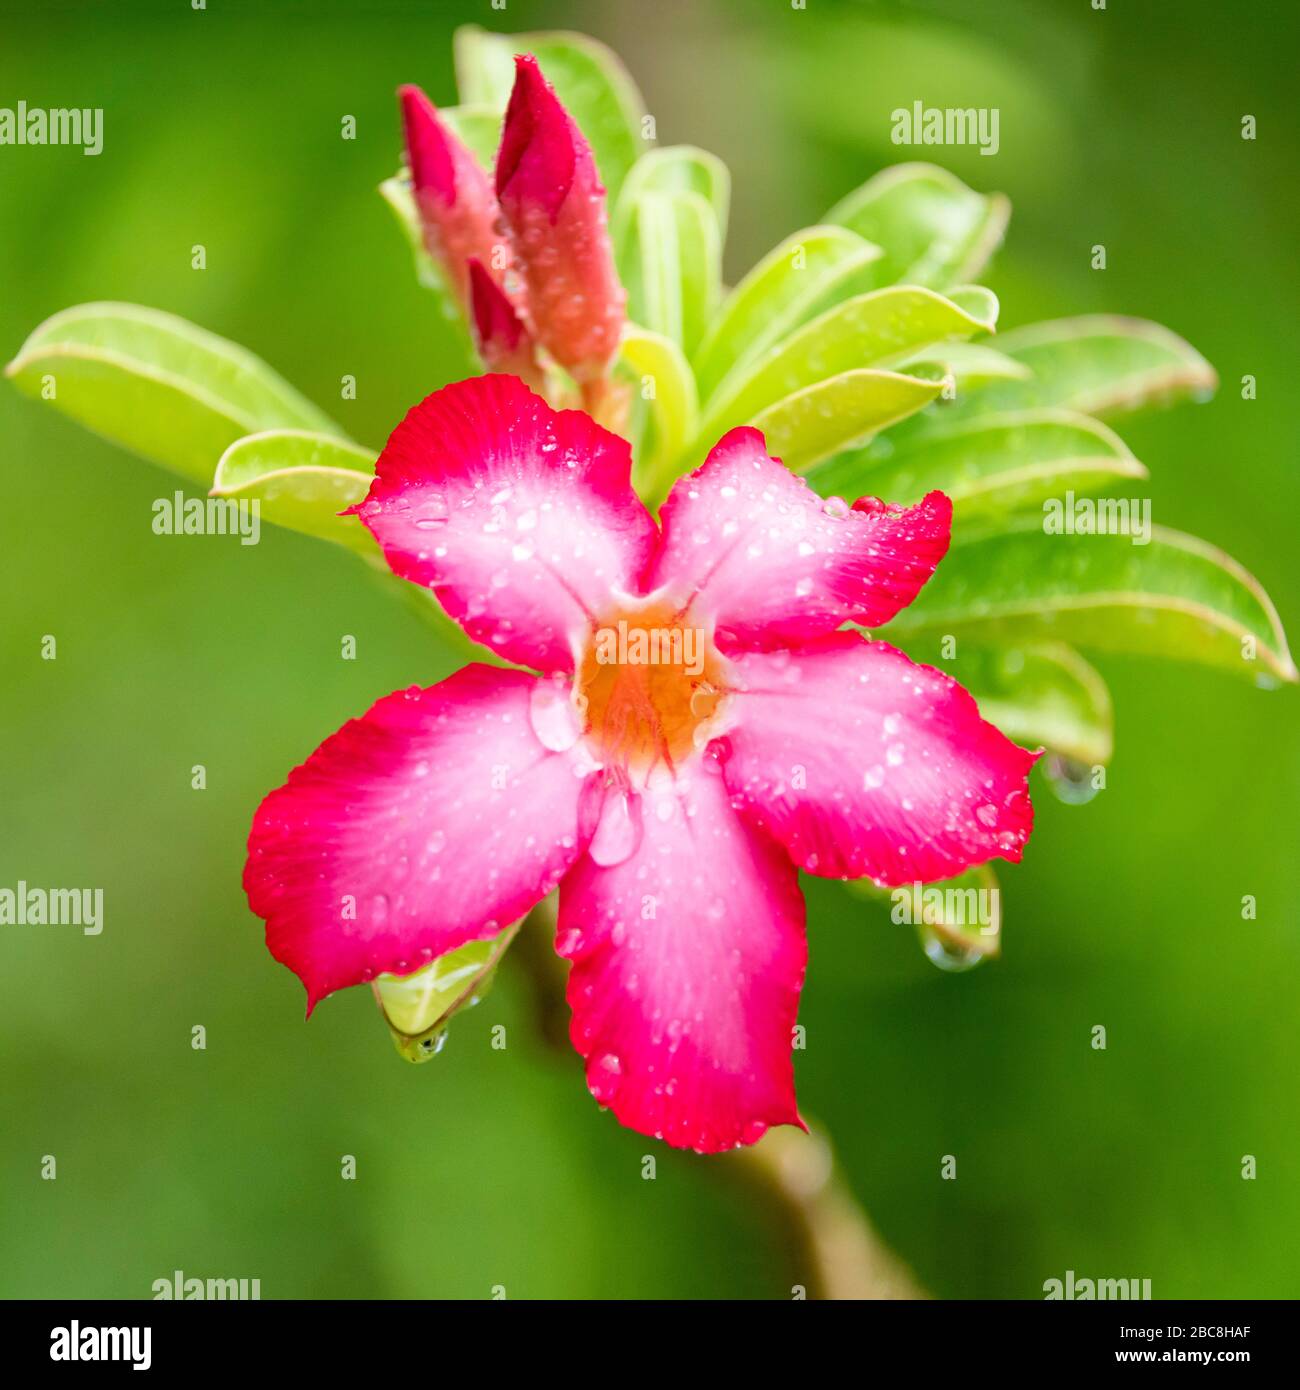 Square view of an Oleander flower. Stock Photo